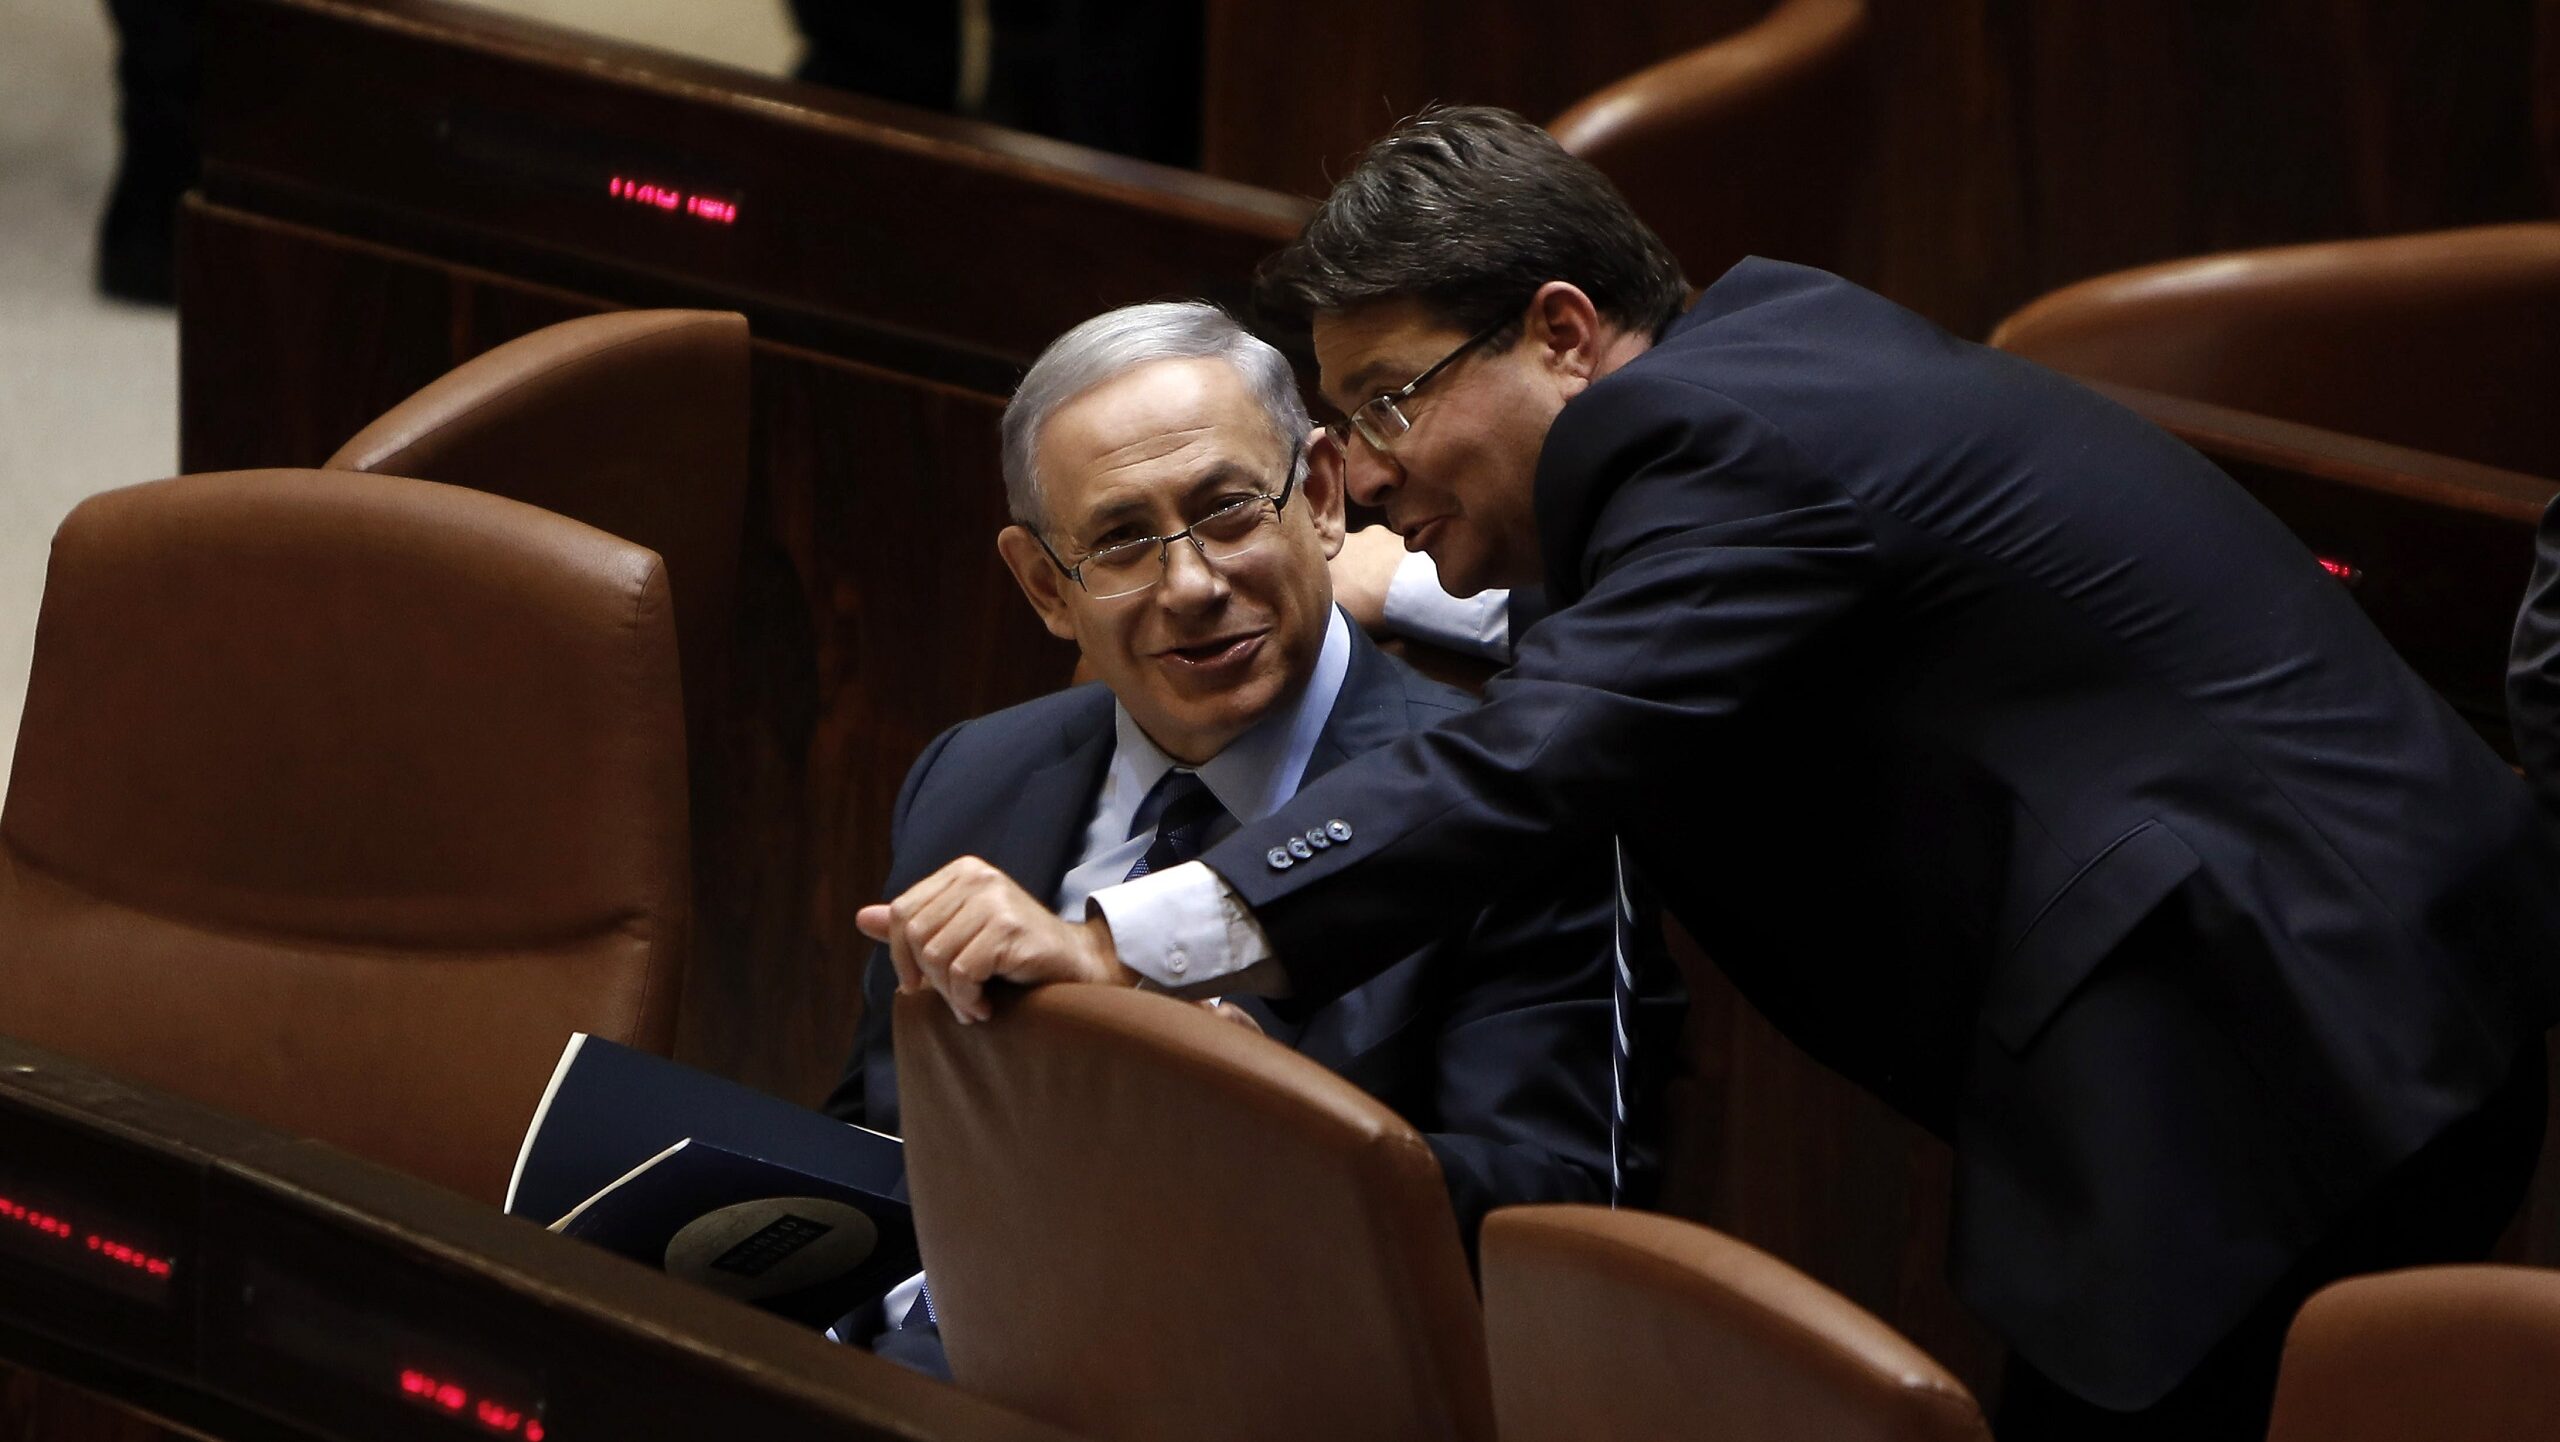 Who is Ofir Akunis?: From Science and Technology Minister to Israel’s Face in New York